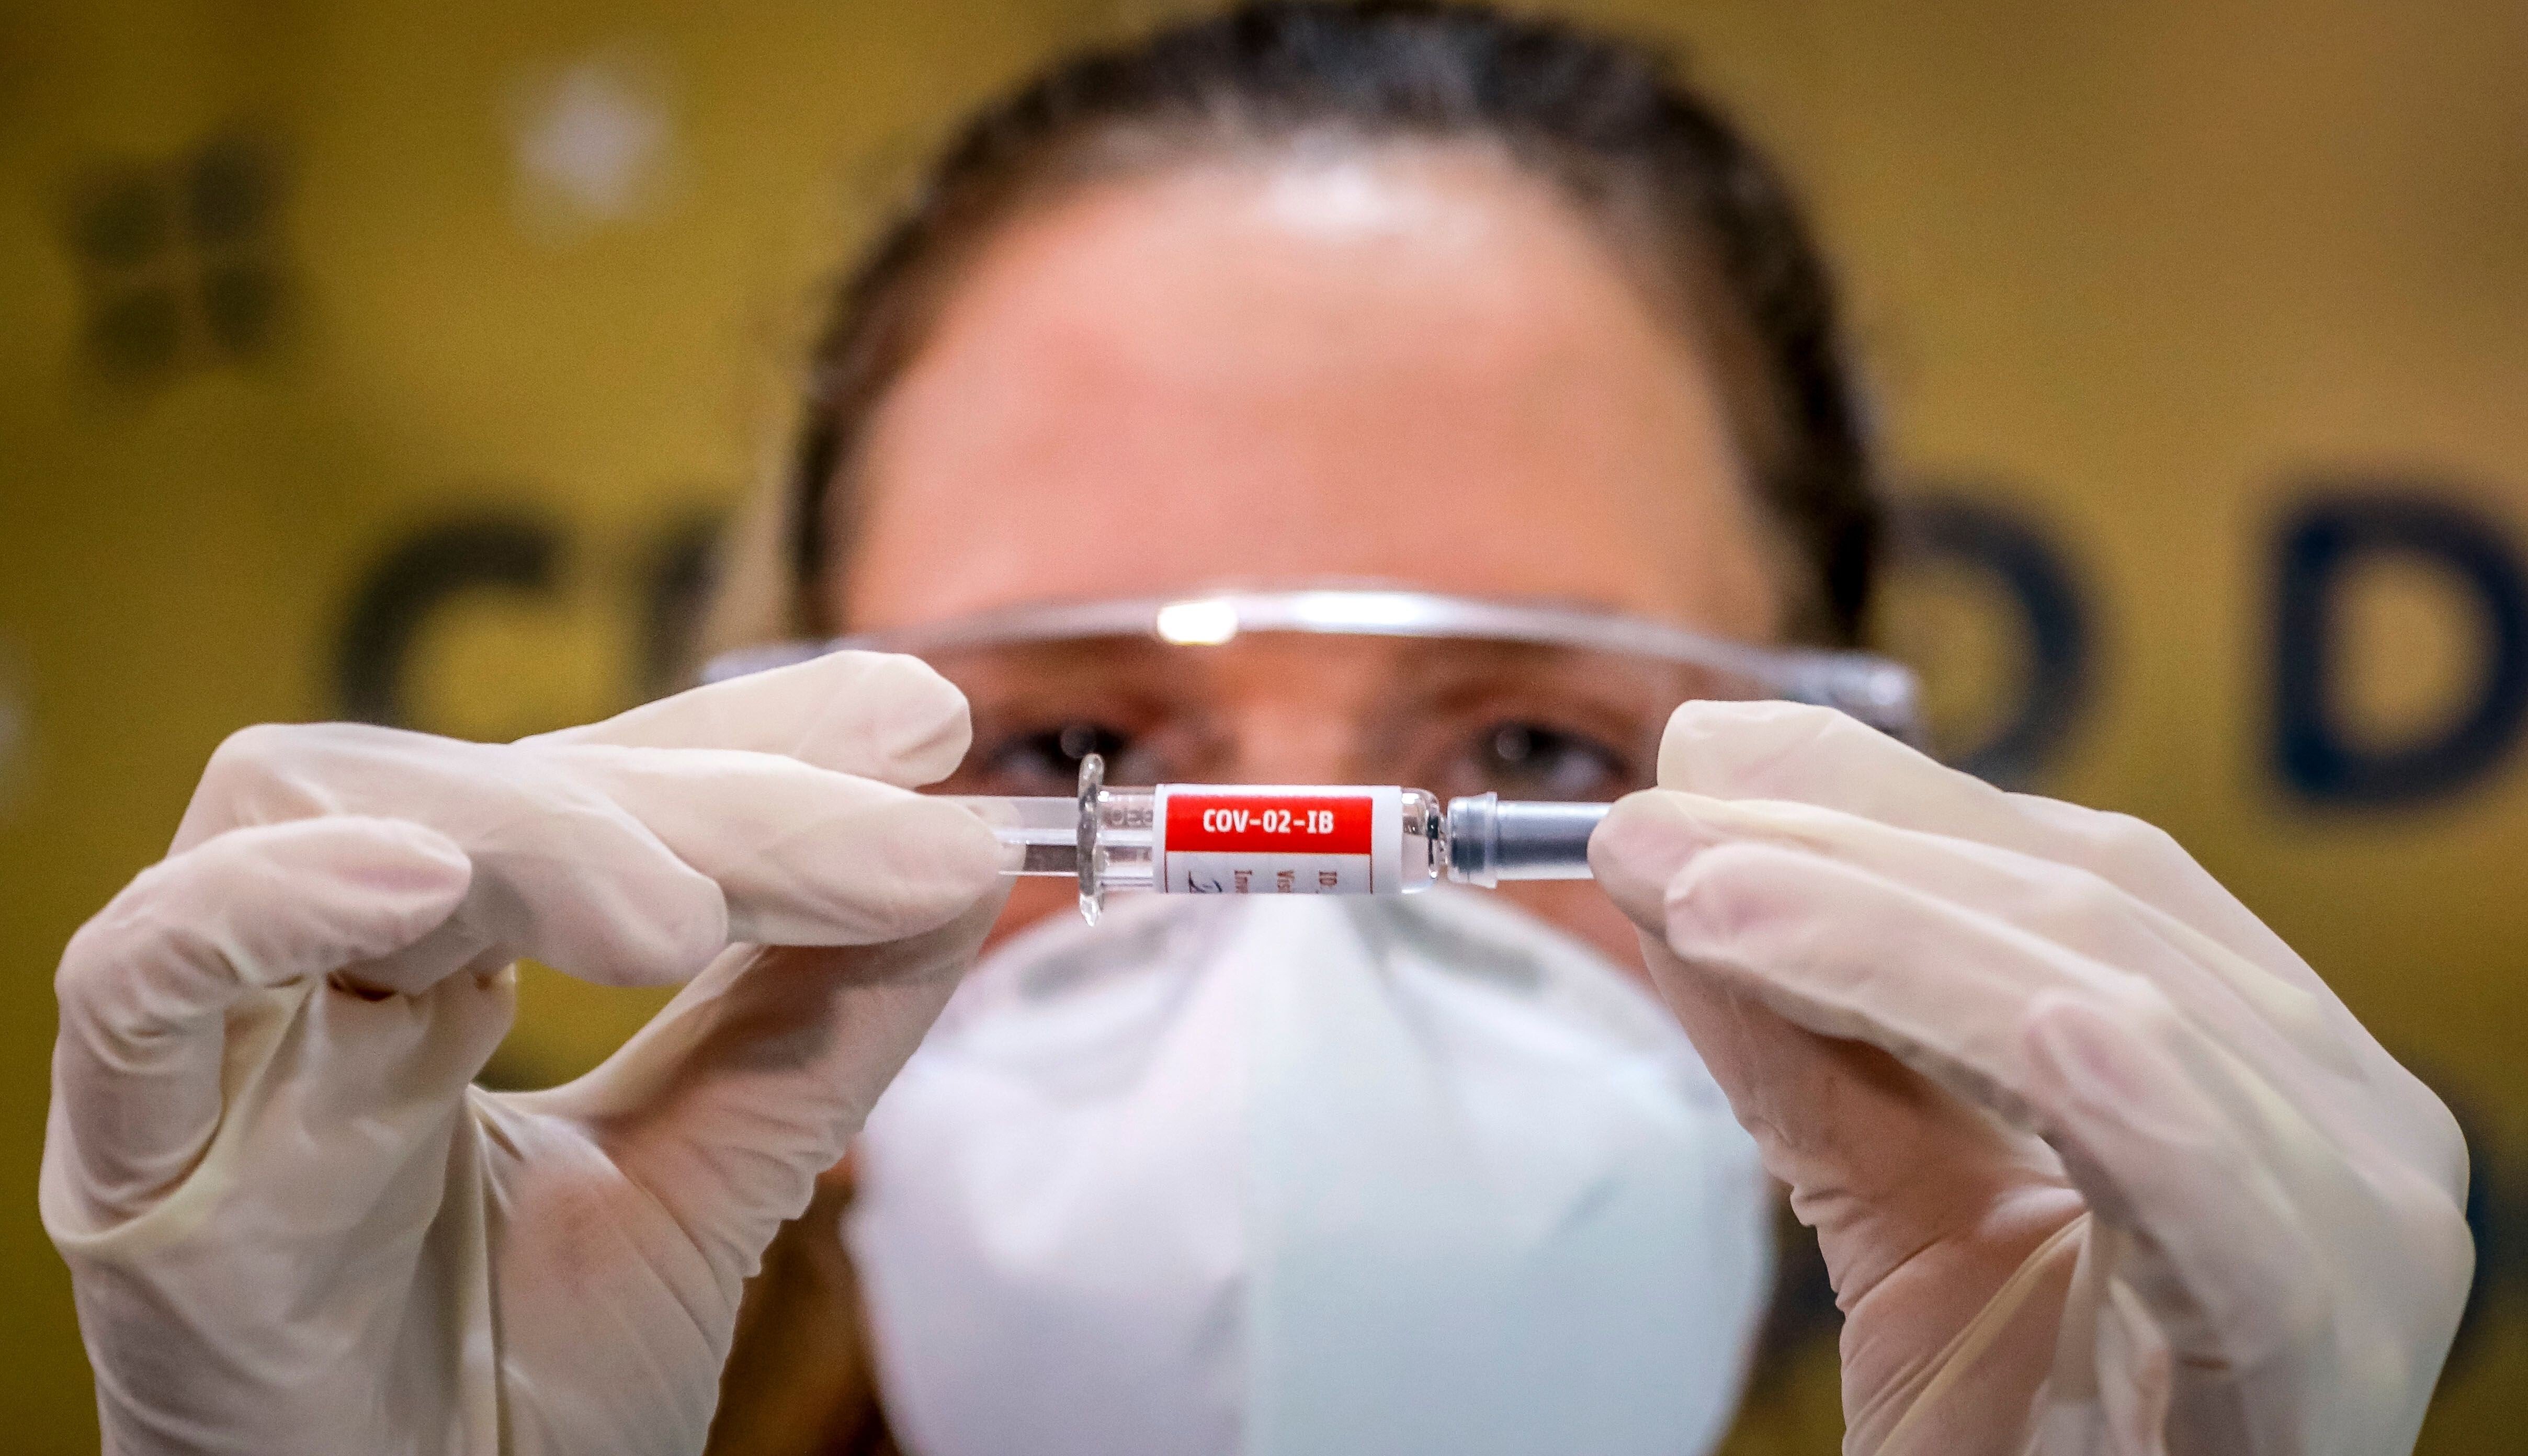 Traders remain focused on the hunt for treatments and vaccines for the coronavirus. Here, a nurse shows a Covid-19 vaccine produced by Chinese company Sinovac Biotech at the Sao Lucas Hospital in Porto Alegre, southern Brazil on August 8, 2020. The vaccine trial is being carried out in Brazil in partnership with Brazilian Research Institute Butanta. Photo: Agence France-Presse